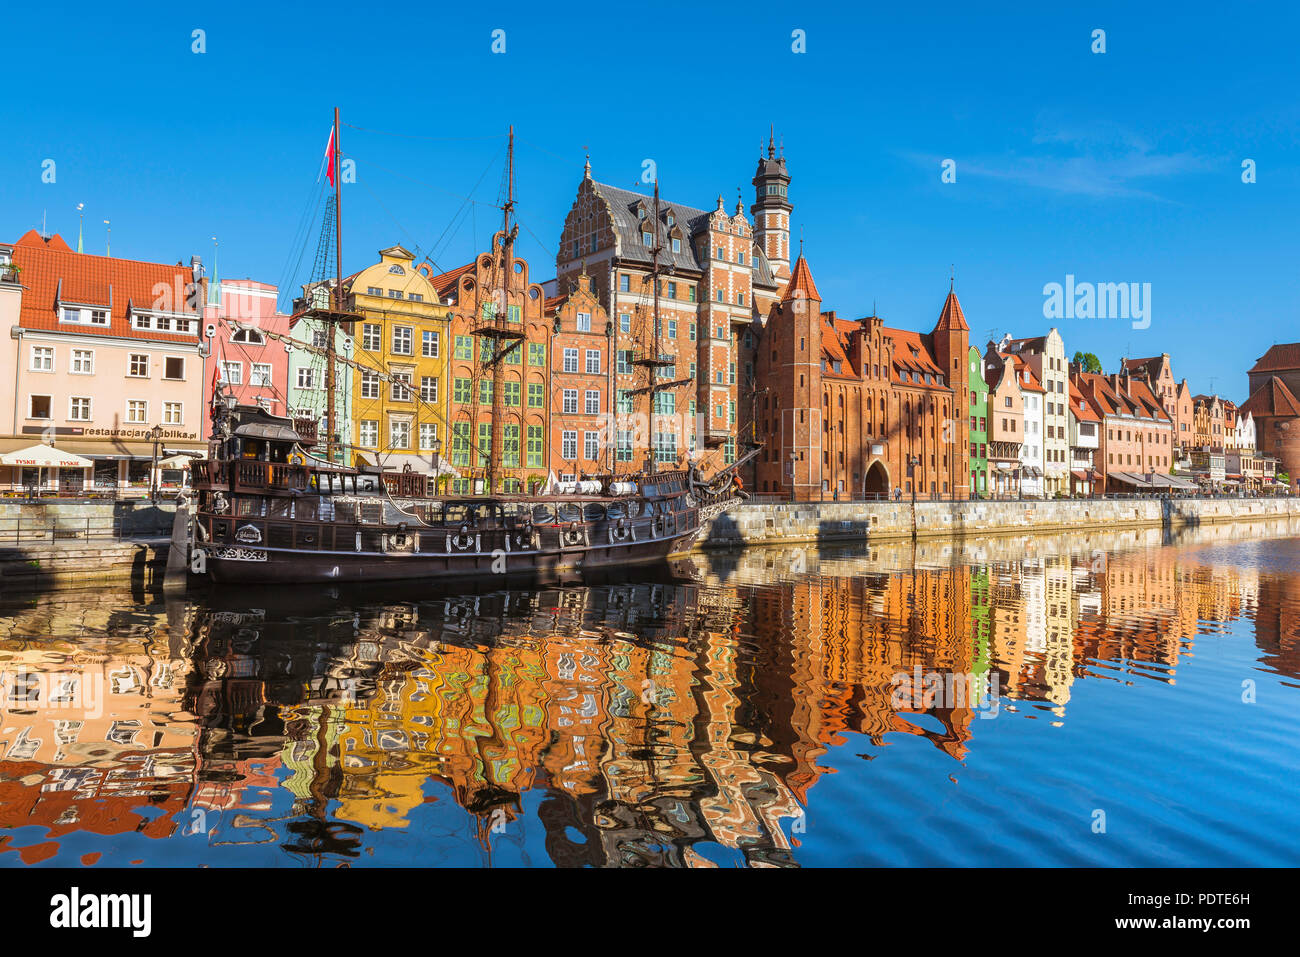 Gdansk old town, view in summer of the scenic Old Town waterfront area in the center of Gdansk, Pomerania, Poland. Stock Photo